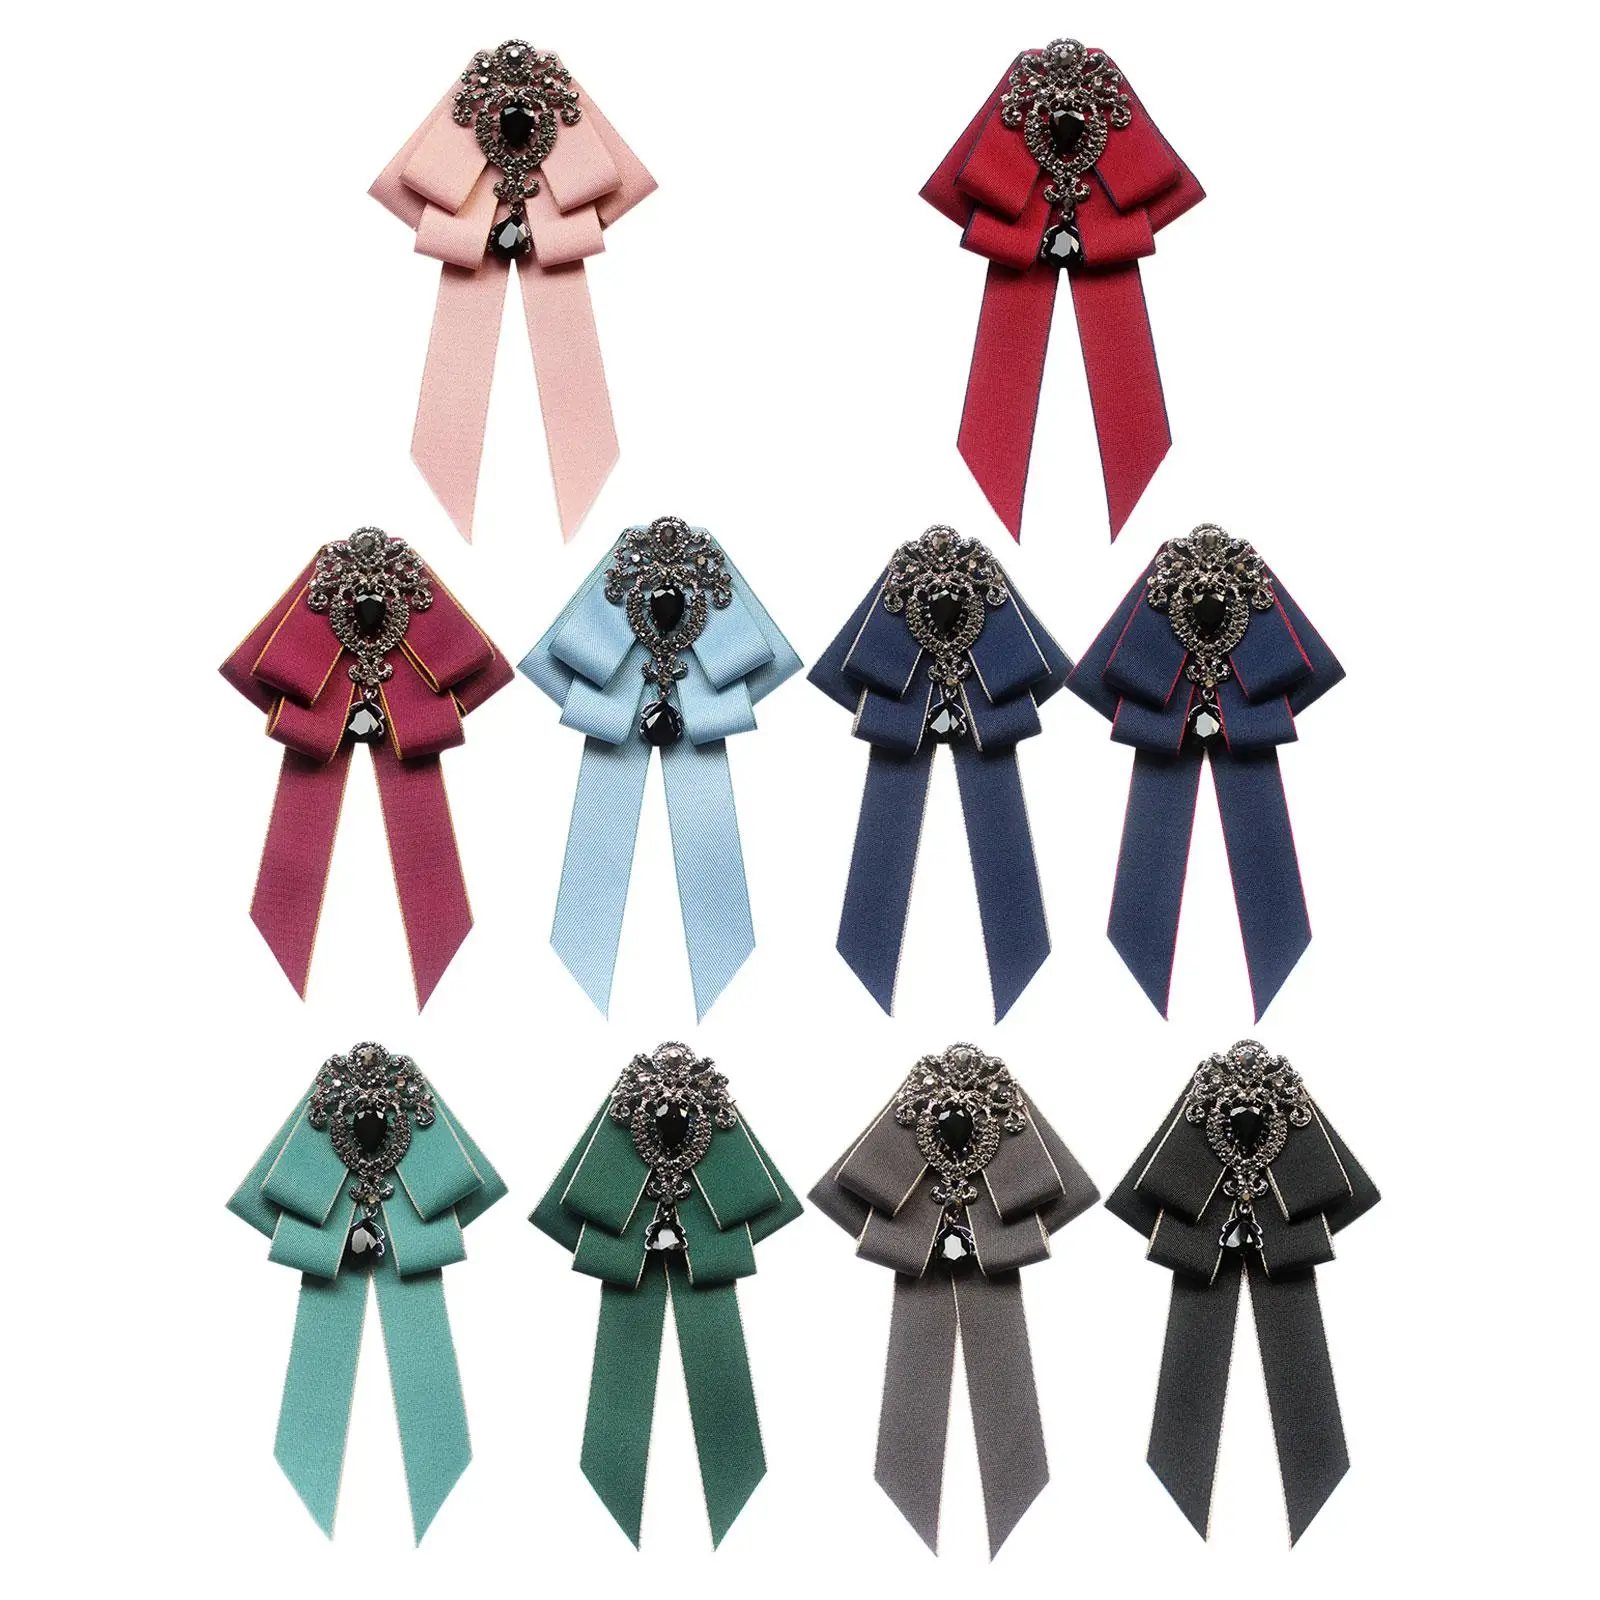 Bow Tie for Women Adjustable Length Clothes Decoration Collar Jewelry Vintage College Style Bowknot Necktie for Party Teens